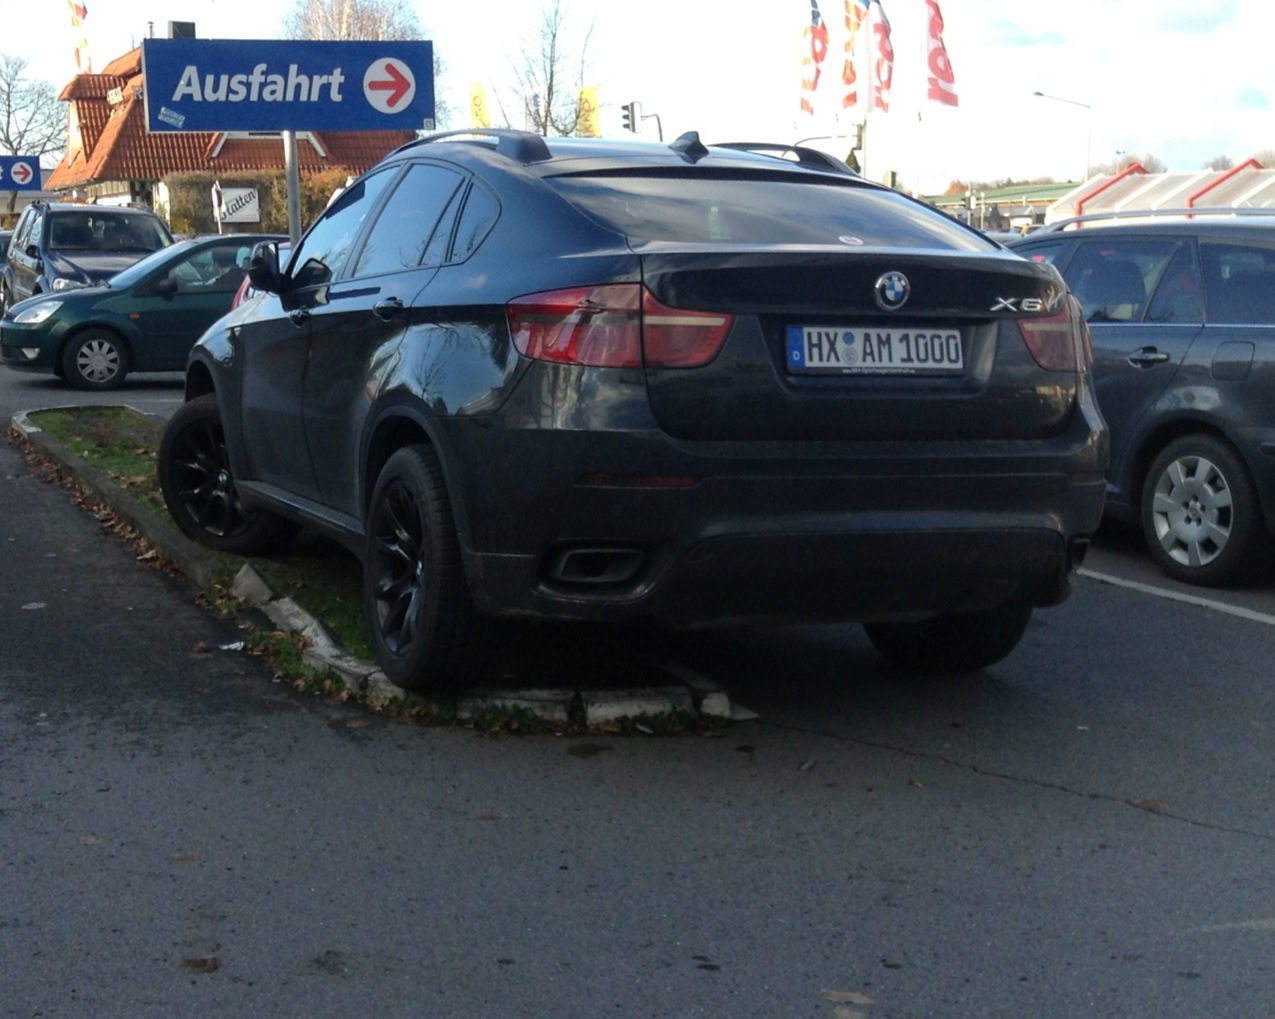 Parking you are doing it wrong!